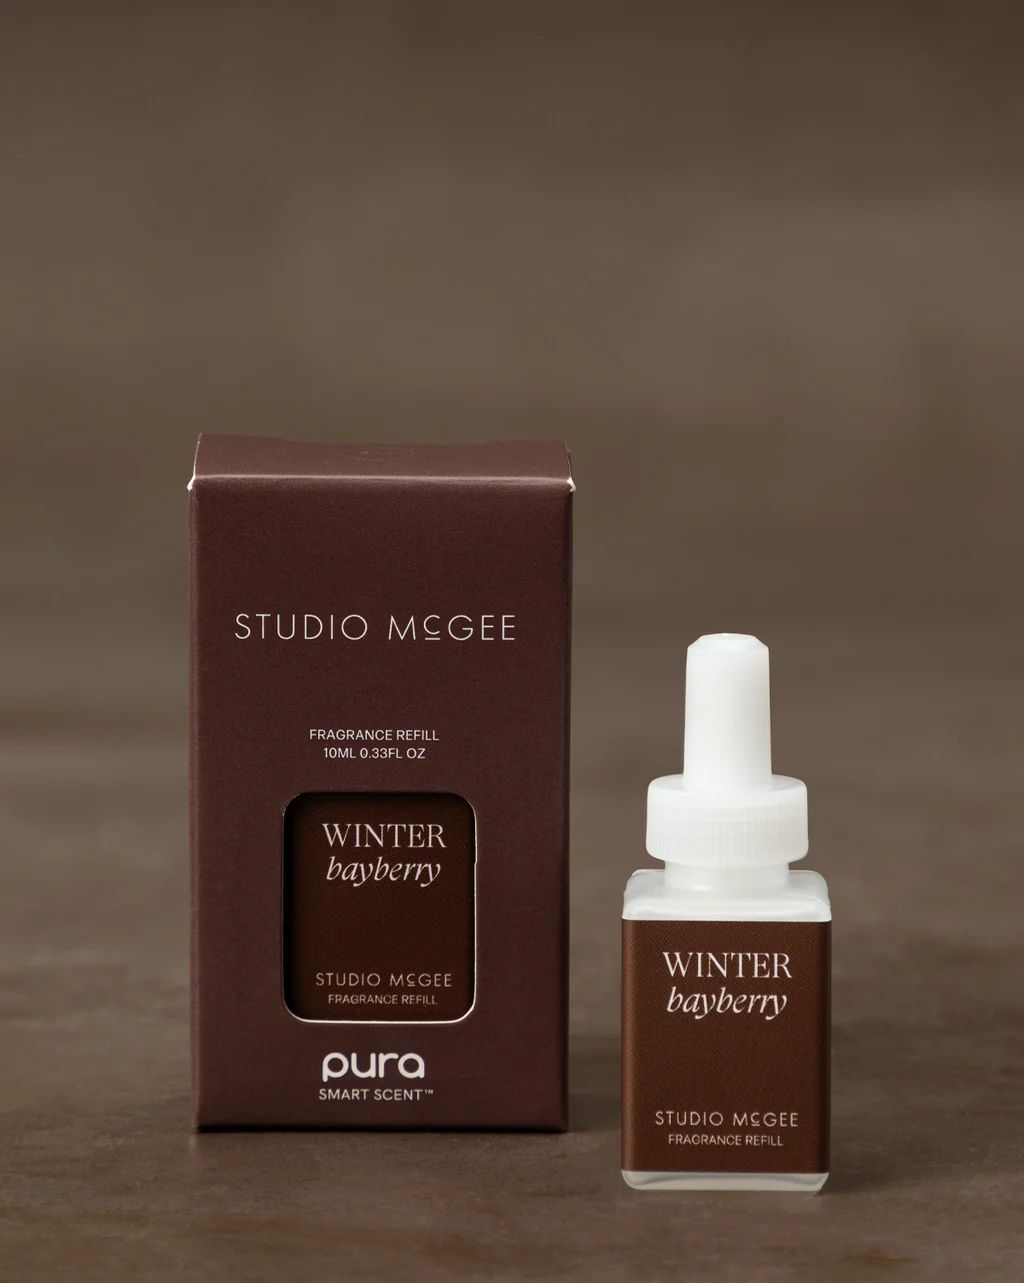 Pura x Studio McGee Home Fragrance Oil Refill Winter Bayberry | McGee & Co.